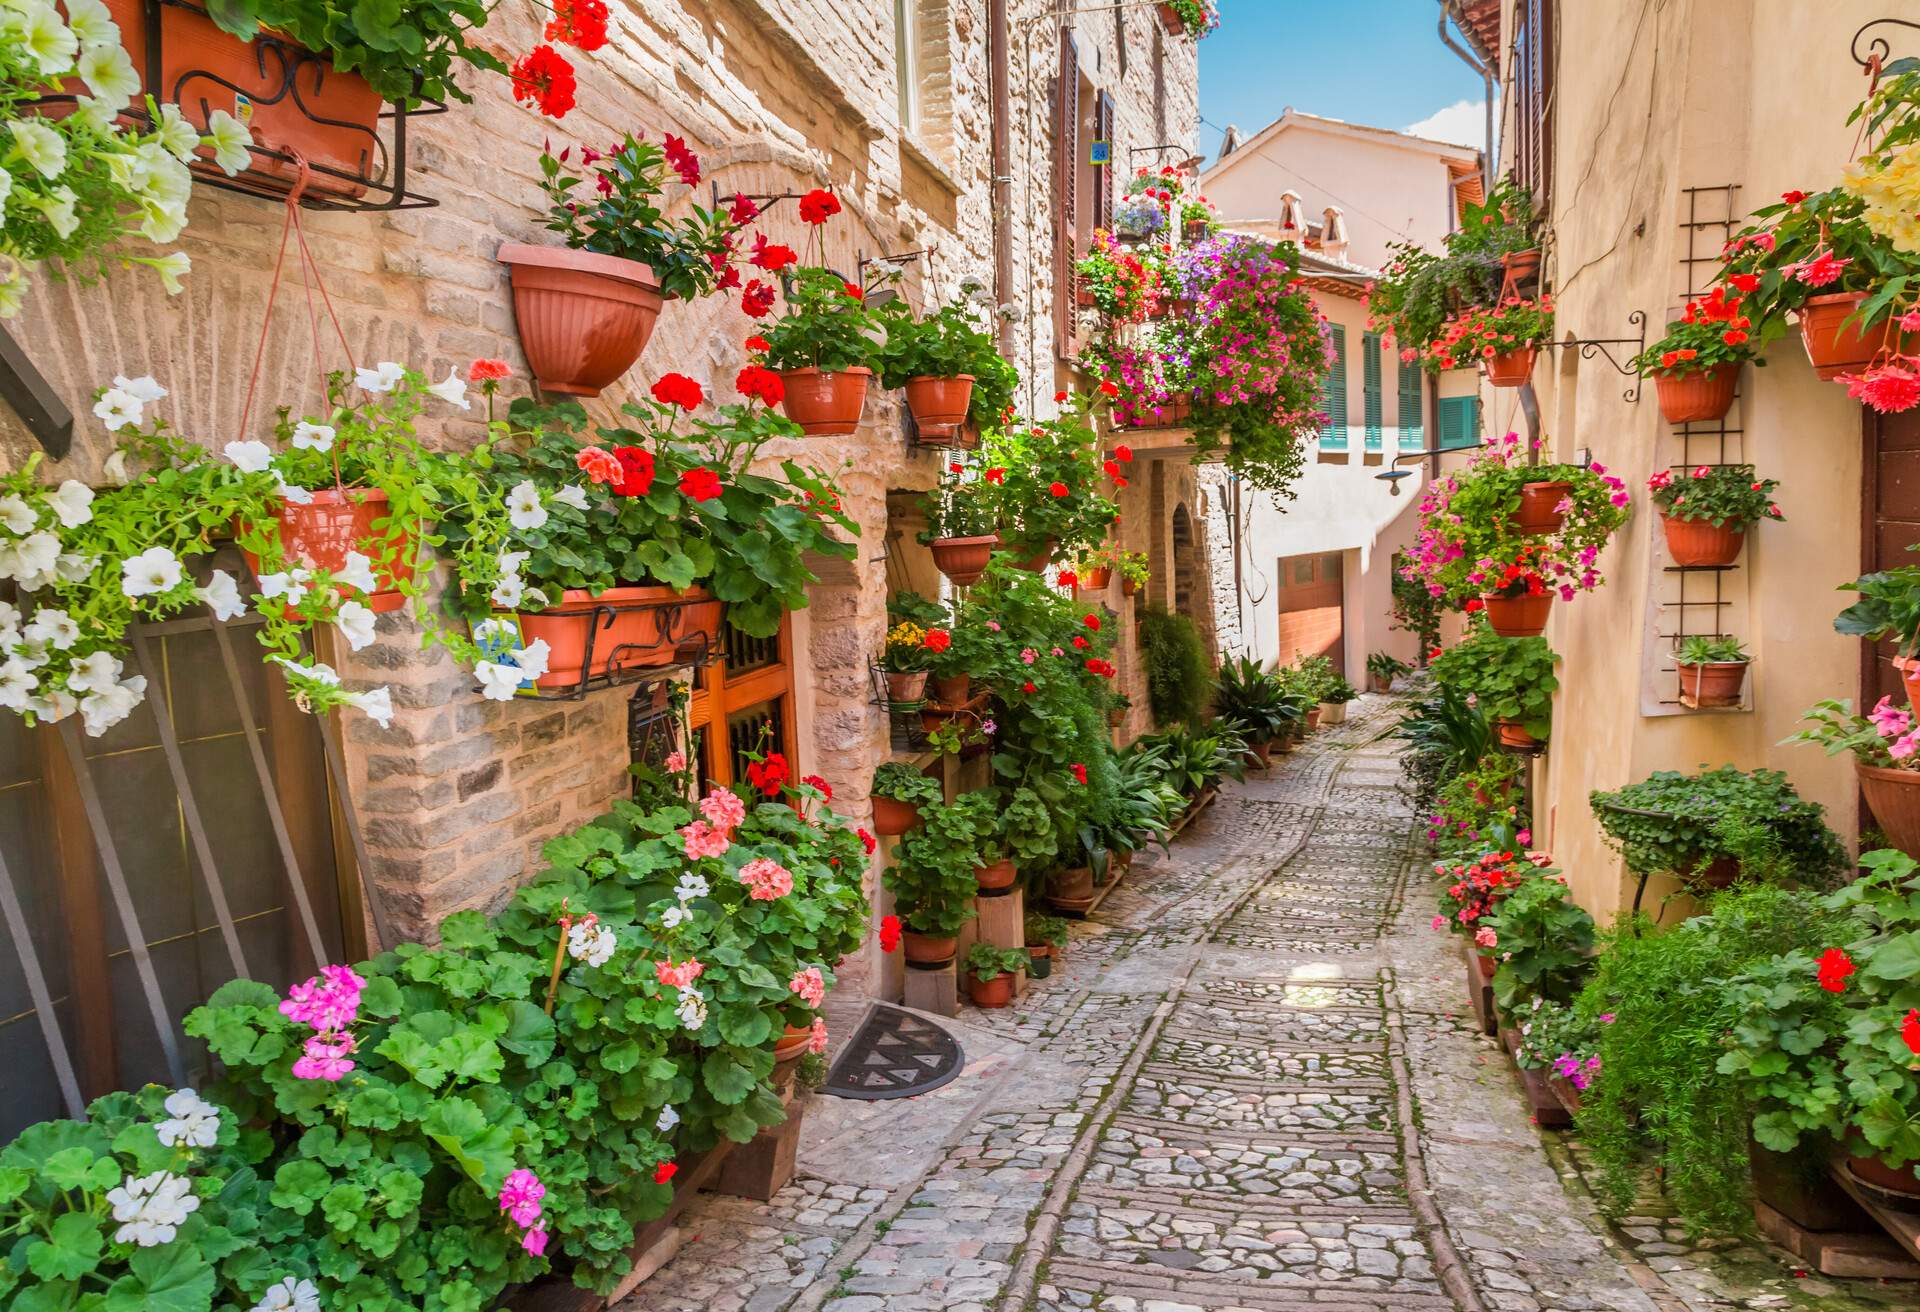 Small town in sunny day, Italy, Umbria; Shutterstock ID 406695817